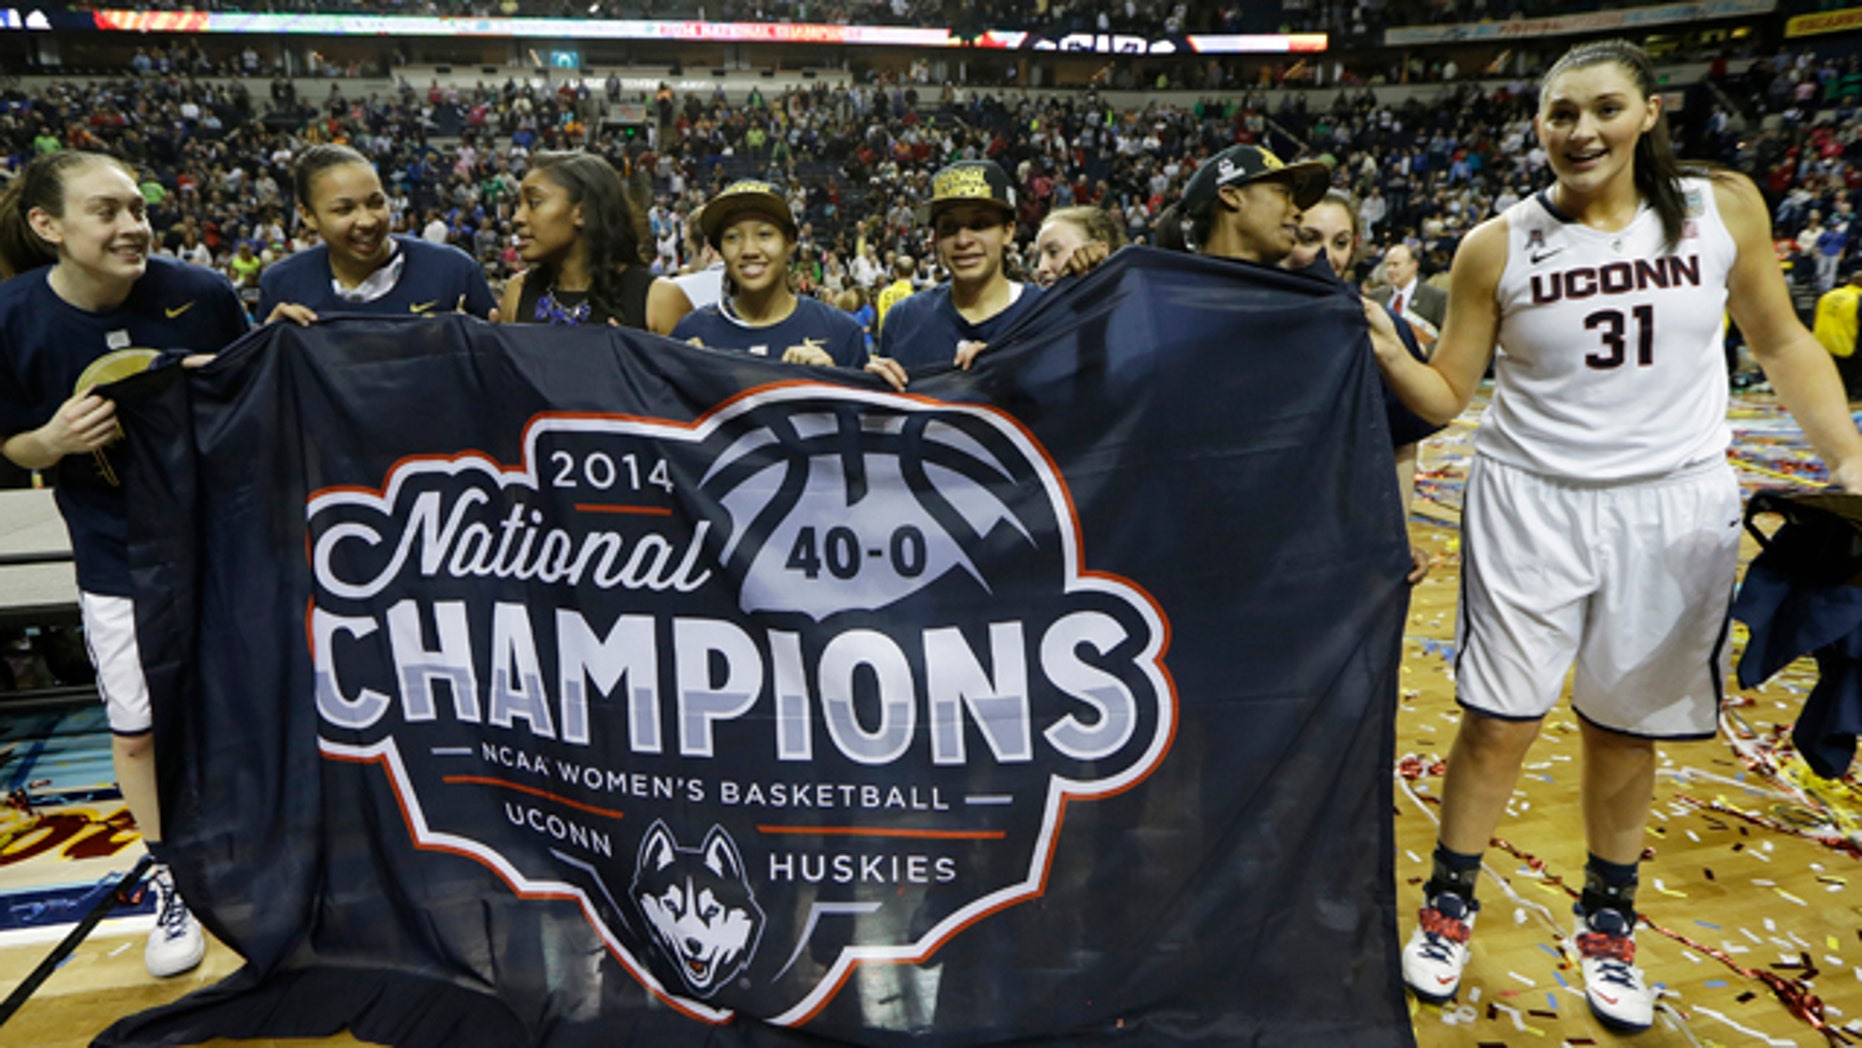 UConn completes perfect season, wins record ninth women's basketball